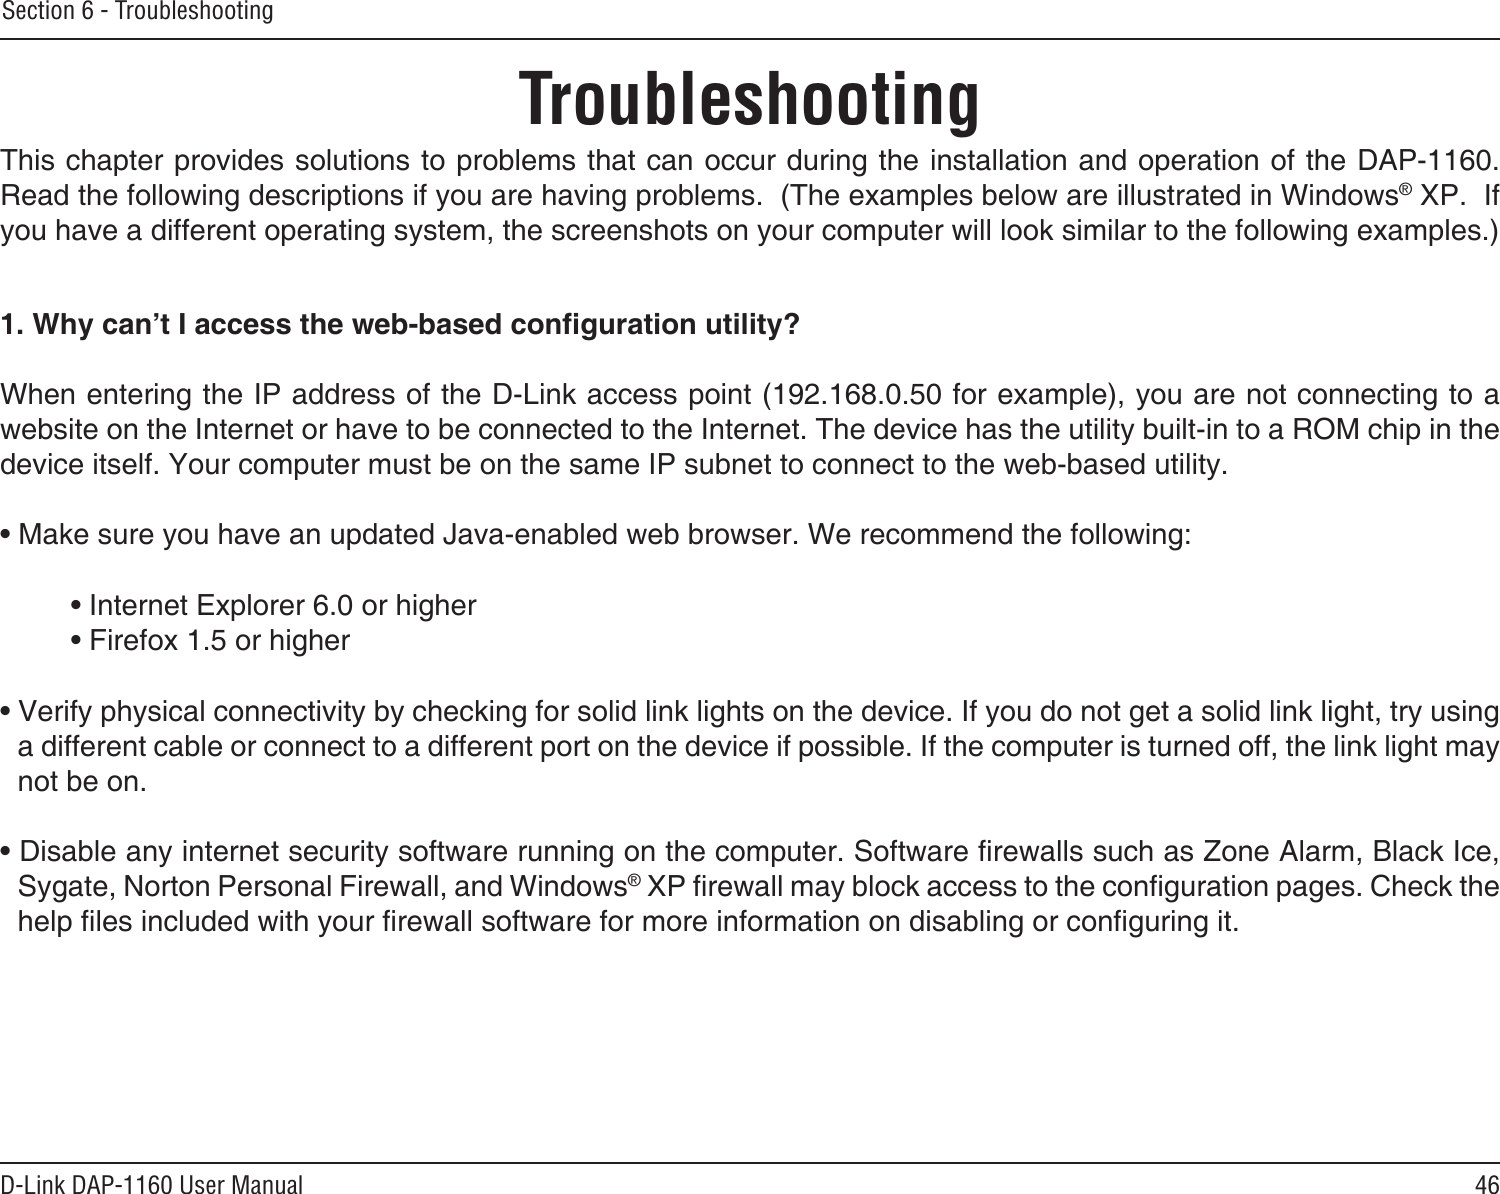 46D-Link DAP-1160 User ManualSection 6 - TroubleshootingTroubleshootingThis chapter provides solutions to problems that can occur during the installation and operation of the DAP-1160.  Read the following descriptions if you are having problems.  (The examples below are illustrated in Windows® XP.  If you have a different operating system, the screenshots on your computer will look similar to the following examples.)1. Why can’t I access the web-based conguration utility?When entering the IP address of the D-Link access point (192.168.0.50 for example), you are not connecting to a website on the Internet or have to be connected to the Internet. The device has the utility built-in to a ROM chip in the device itself. Your computer must be on the same IP subnet to connect to the web-based utility. • Make sure you have an updated Java-enabled web browser. We recommend the following: • Internet Explorer 6.0 or higher  • Firefox 1.5 or higher • Verify physical connectivity by checking for solid link lights on the device. If you do not get a solid link light, try using a different cable or connect to a different port on the device if possible. If the computer is turned off, the link light may not be on.• Disable any internet security software running on the computer. Software rewalls such as Zone Alarm, Black Ice, Sygate, Norton Personal Firewall, and Windows® XP rewall may block access to the conguration pages. Check the help les included with your rewall software for more information on disabling or conguring it.